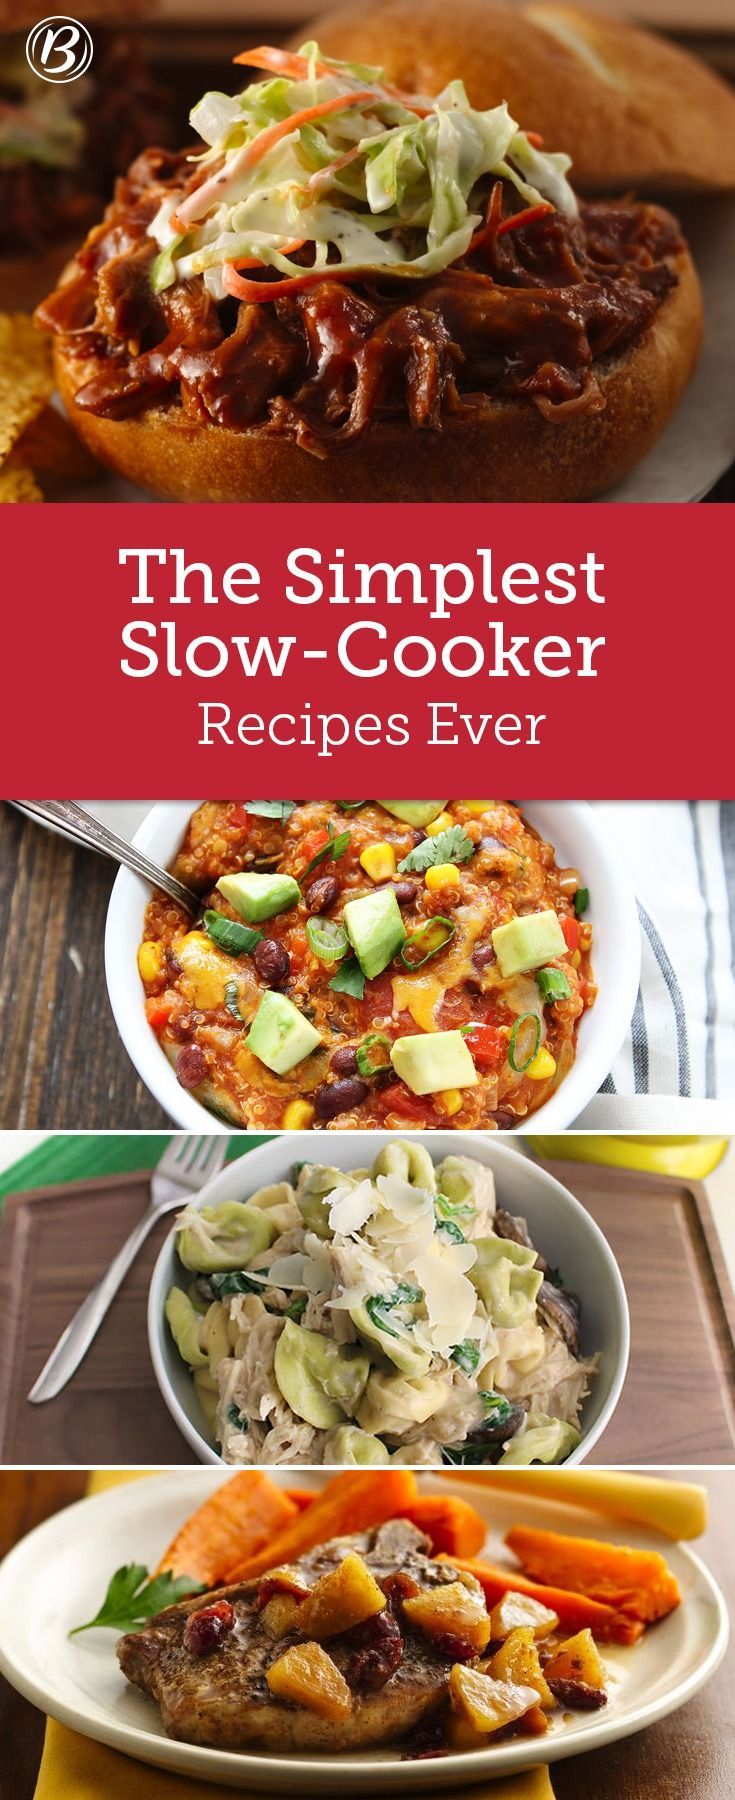 The Simplest Slow-Cooker Recipes Ever -   16 healthy recipes Slow Cooker ovens
 ideas